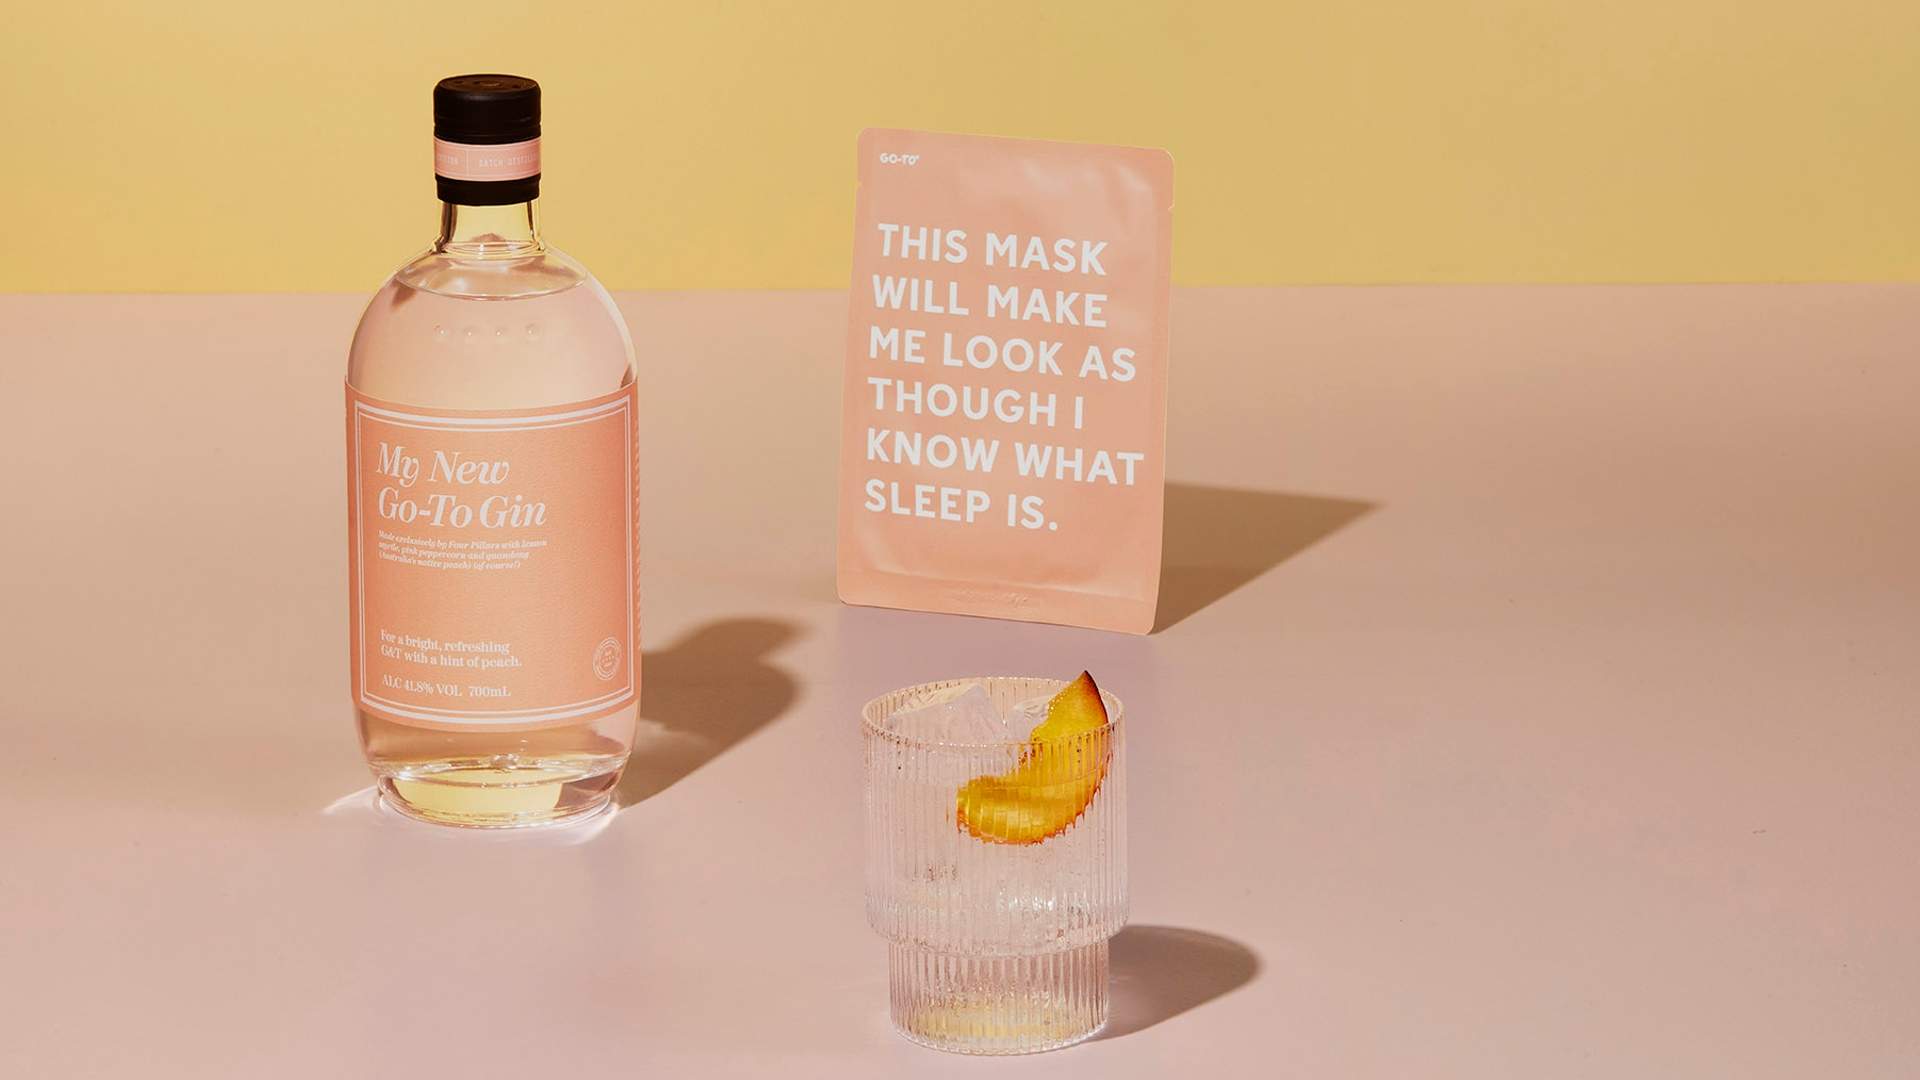 Four Pillars and Go-To Skincare Have Joined Forces to Create New Limited-Edition 'Go-To Gin'